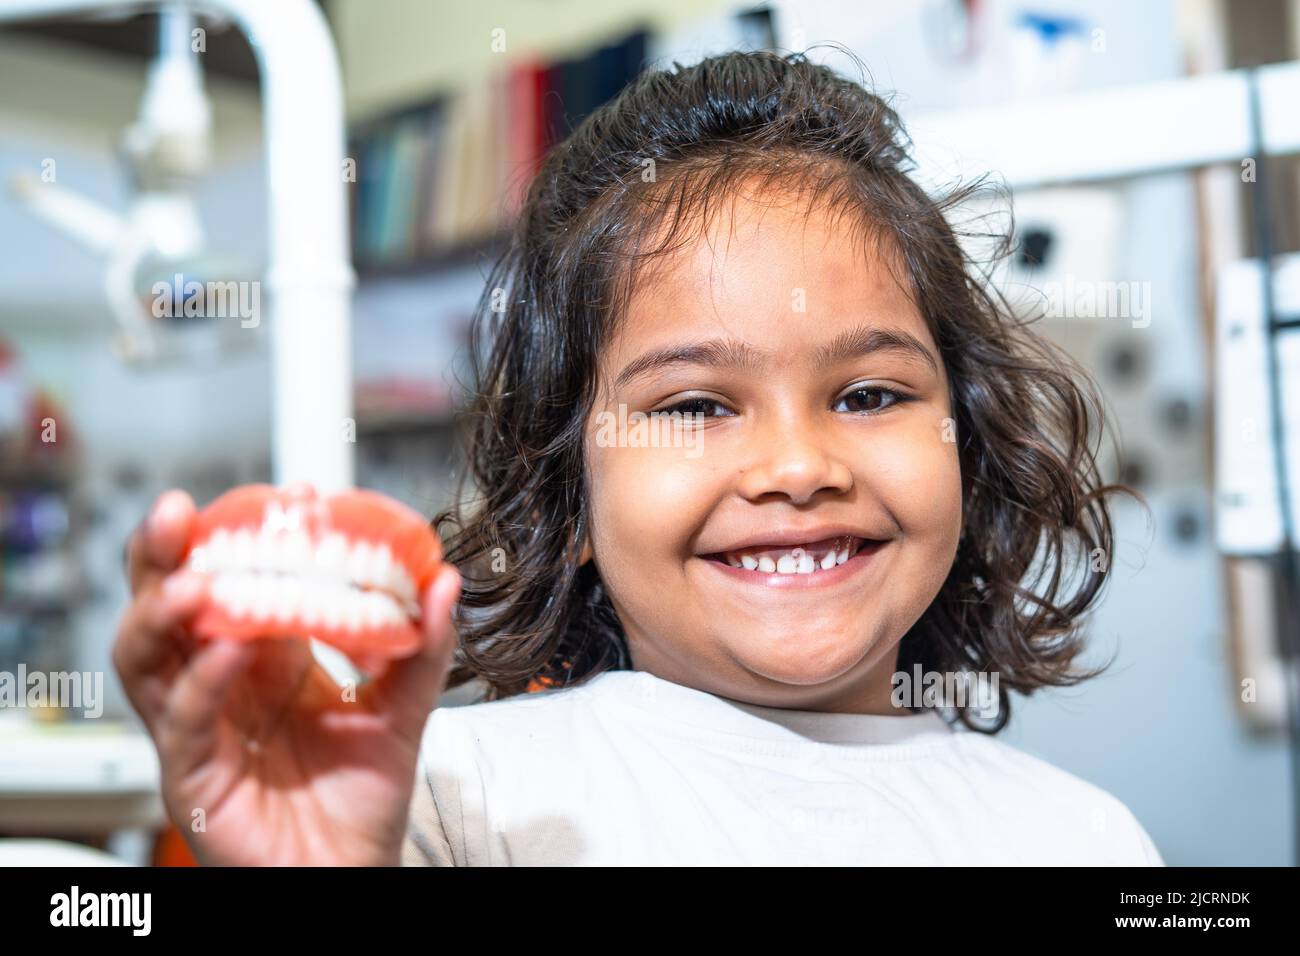 Happy smiling kid showing dentures by looking at camera - concept of childrens healthy oral or dental care treatment. Stock Photo